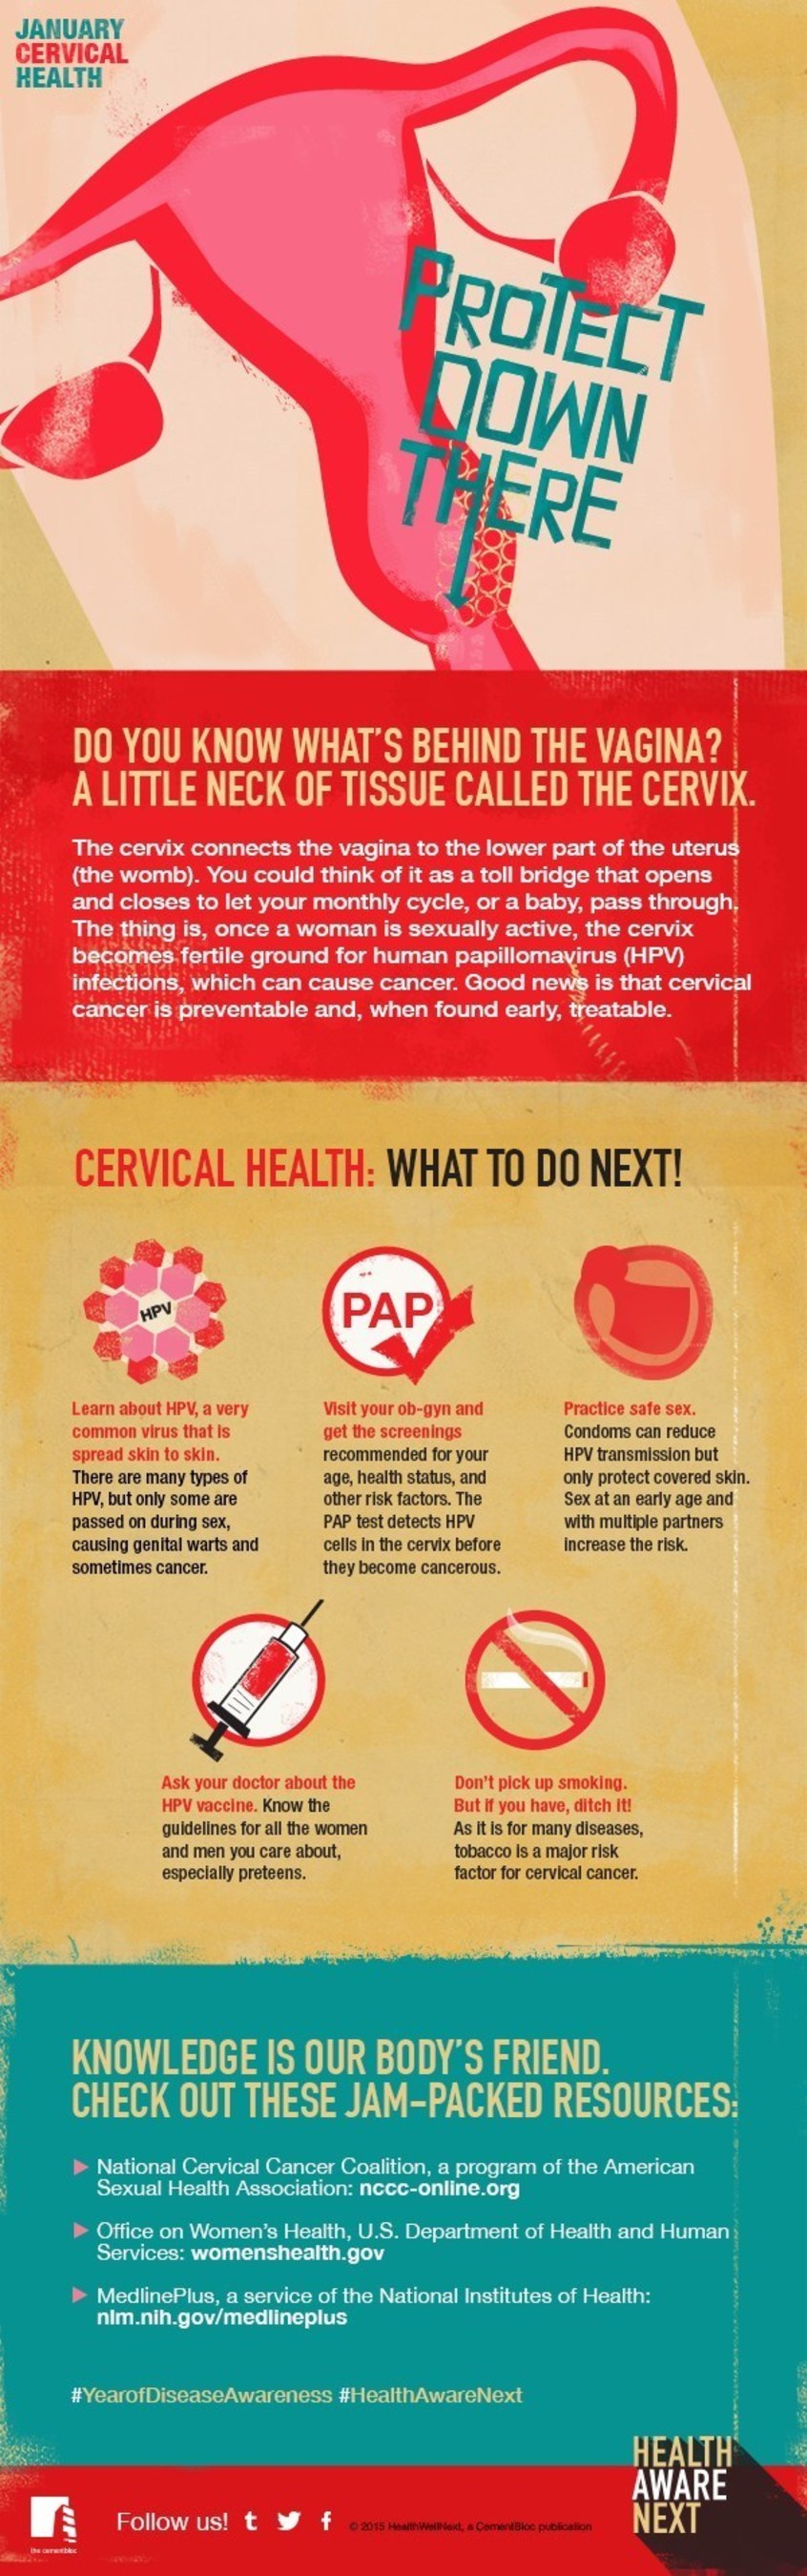 This Cervical Health poster is the first in an infographic series for HealthAwareNext's Year of Disease Awareness, a social media initiative that began in January.